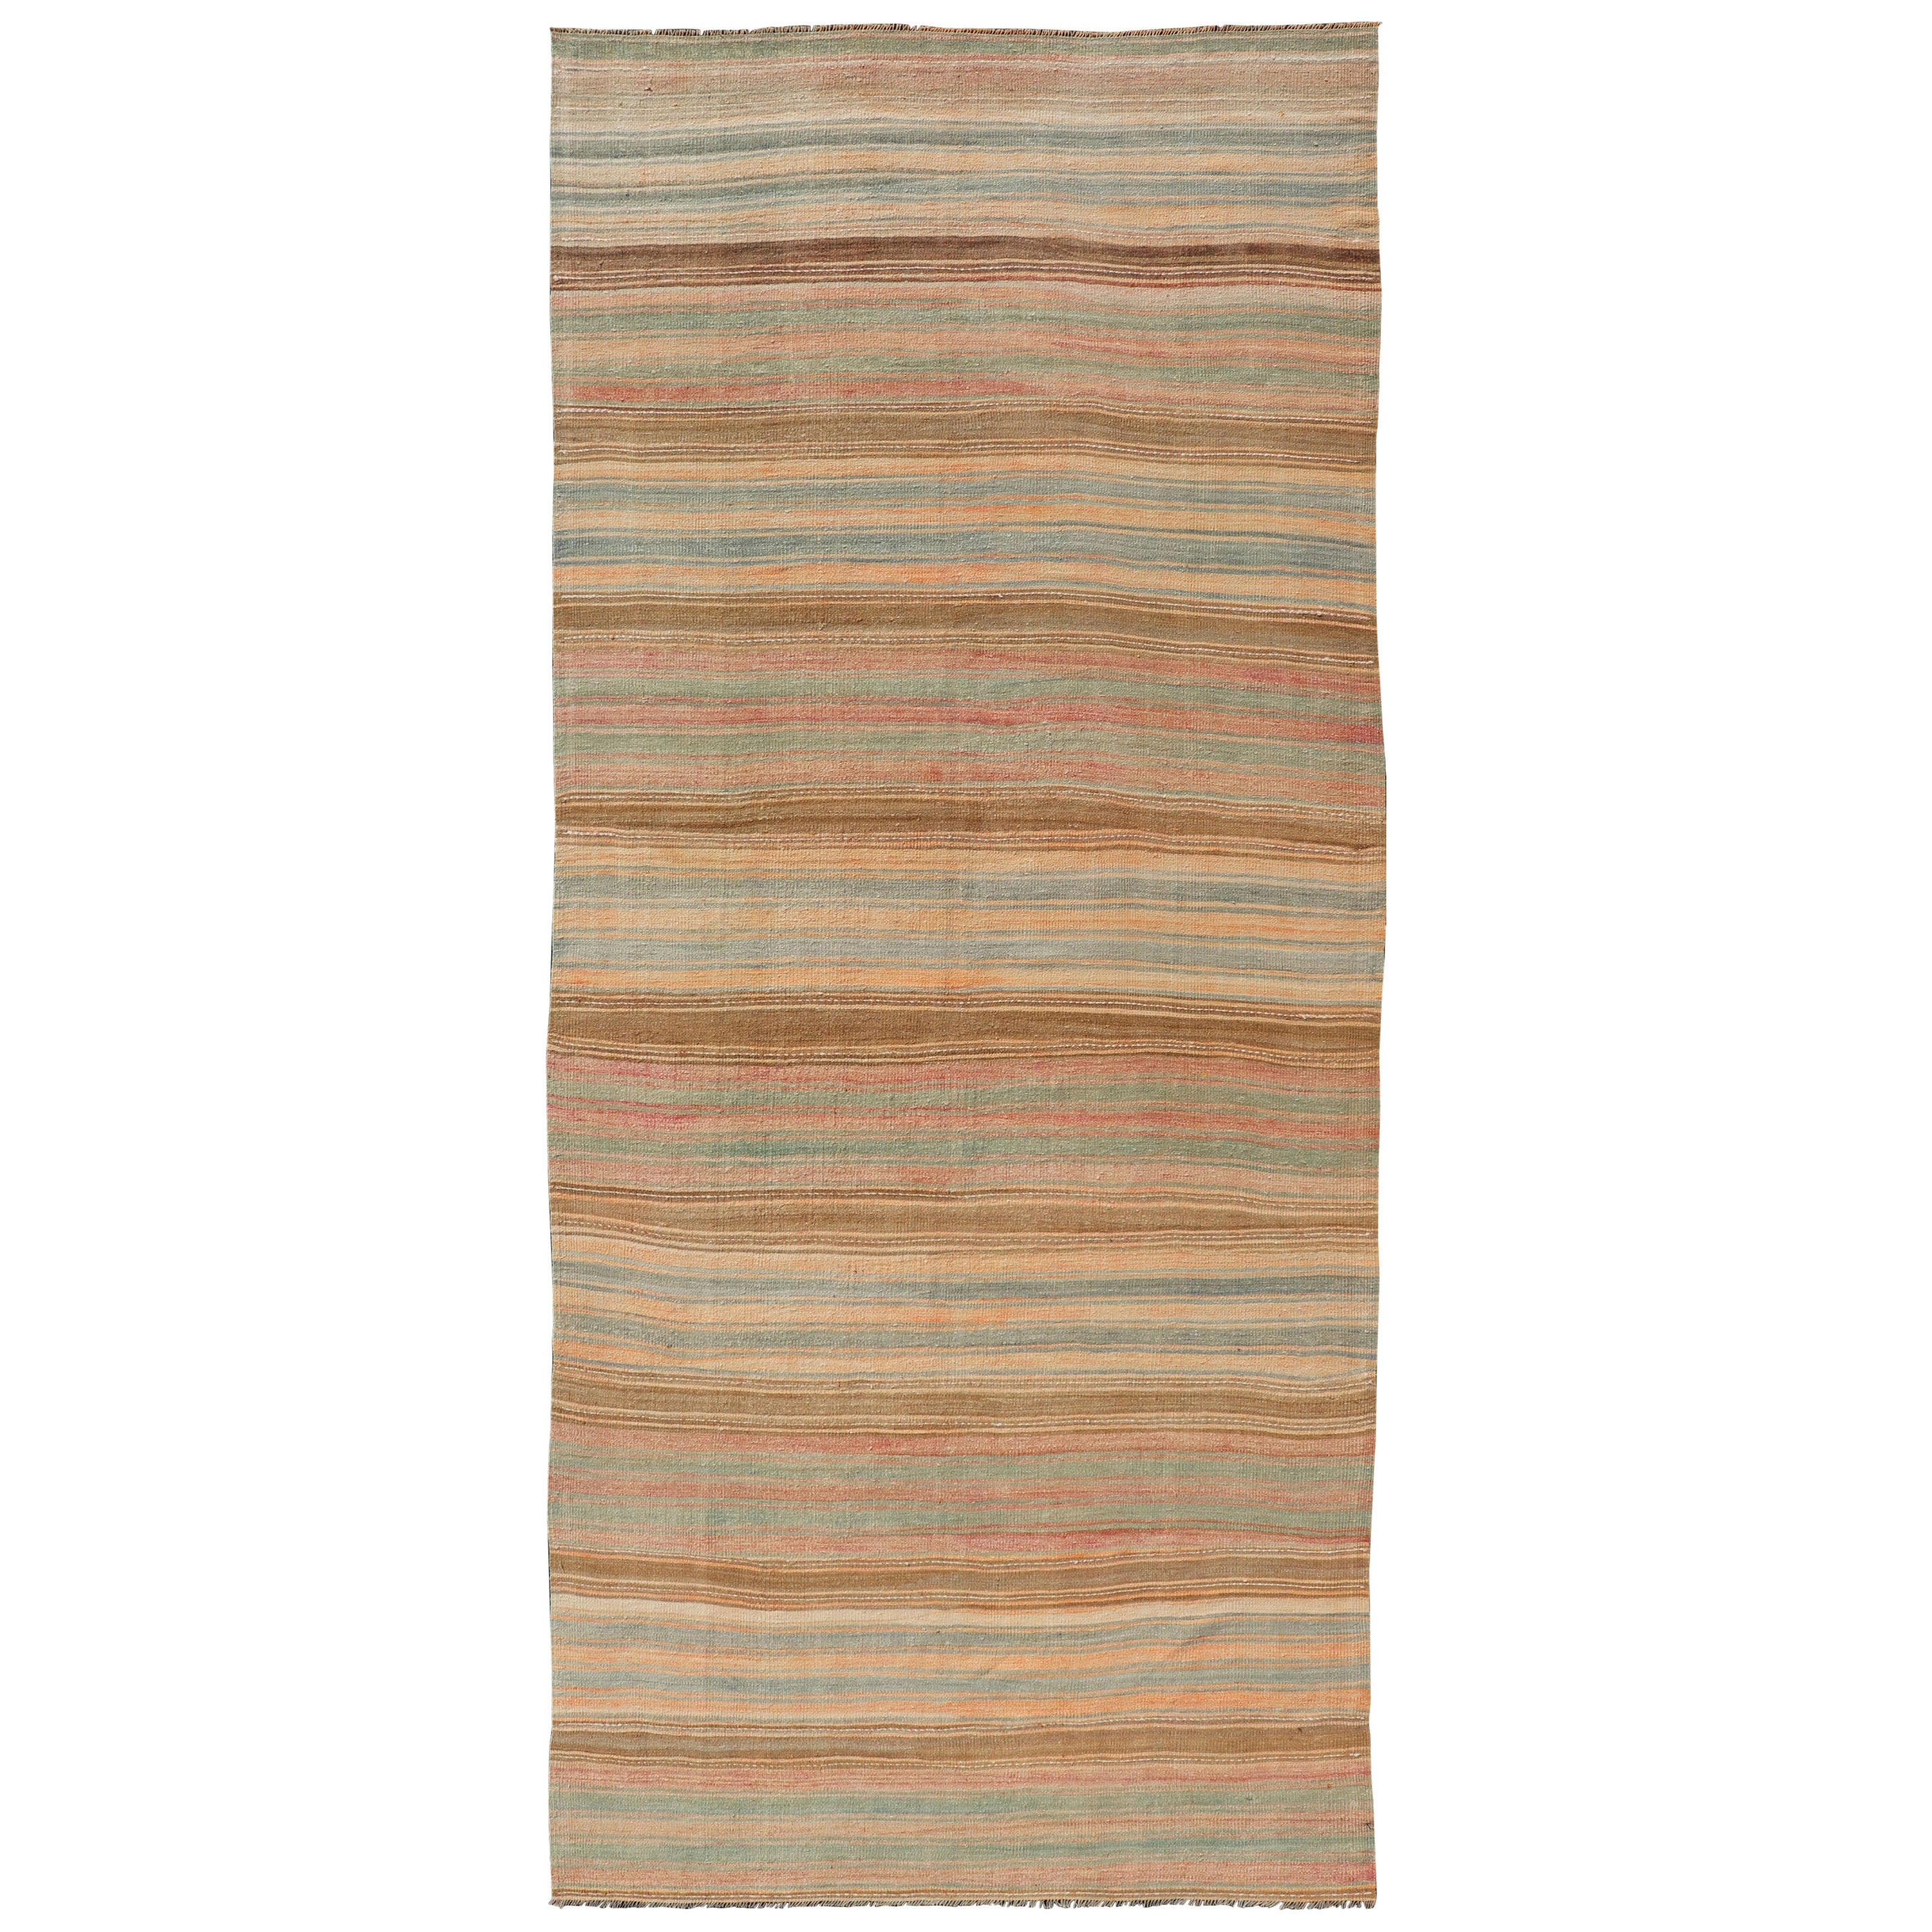 Vintage Long Colorful Kilim Gallery Runner with Stripe Design in Multi Colors